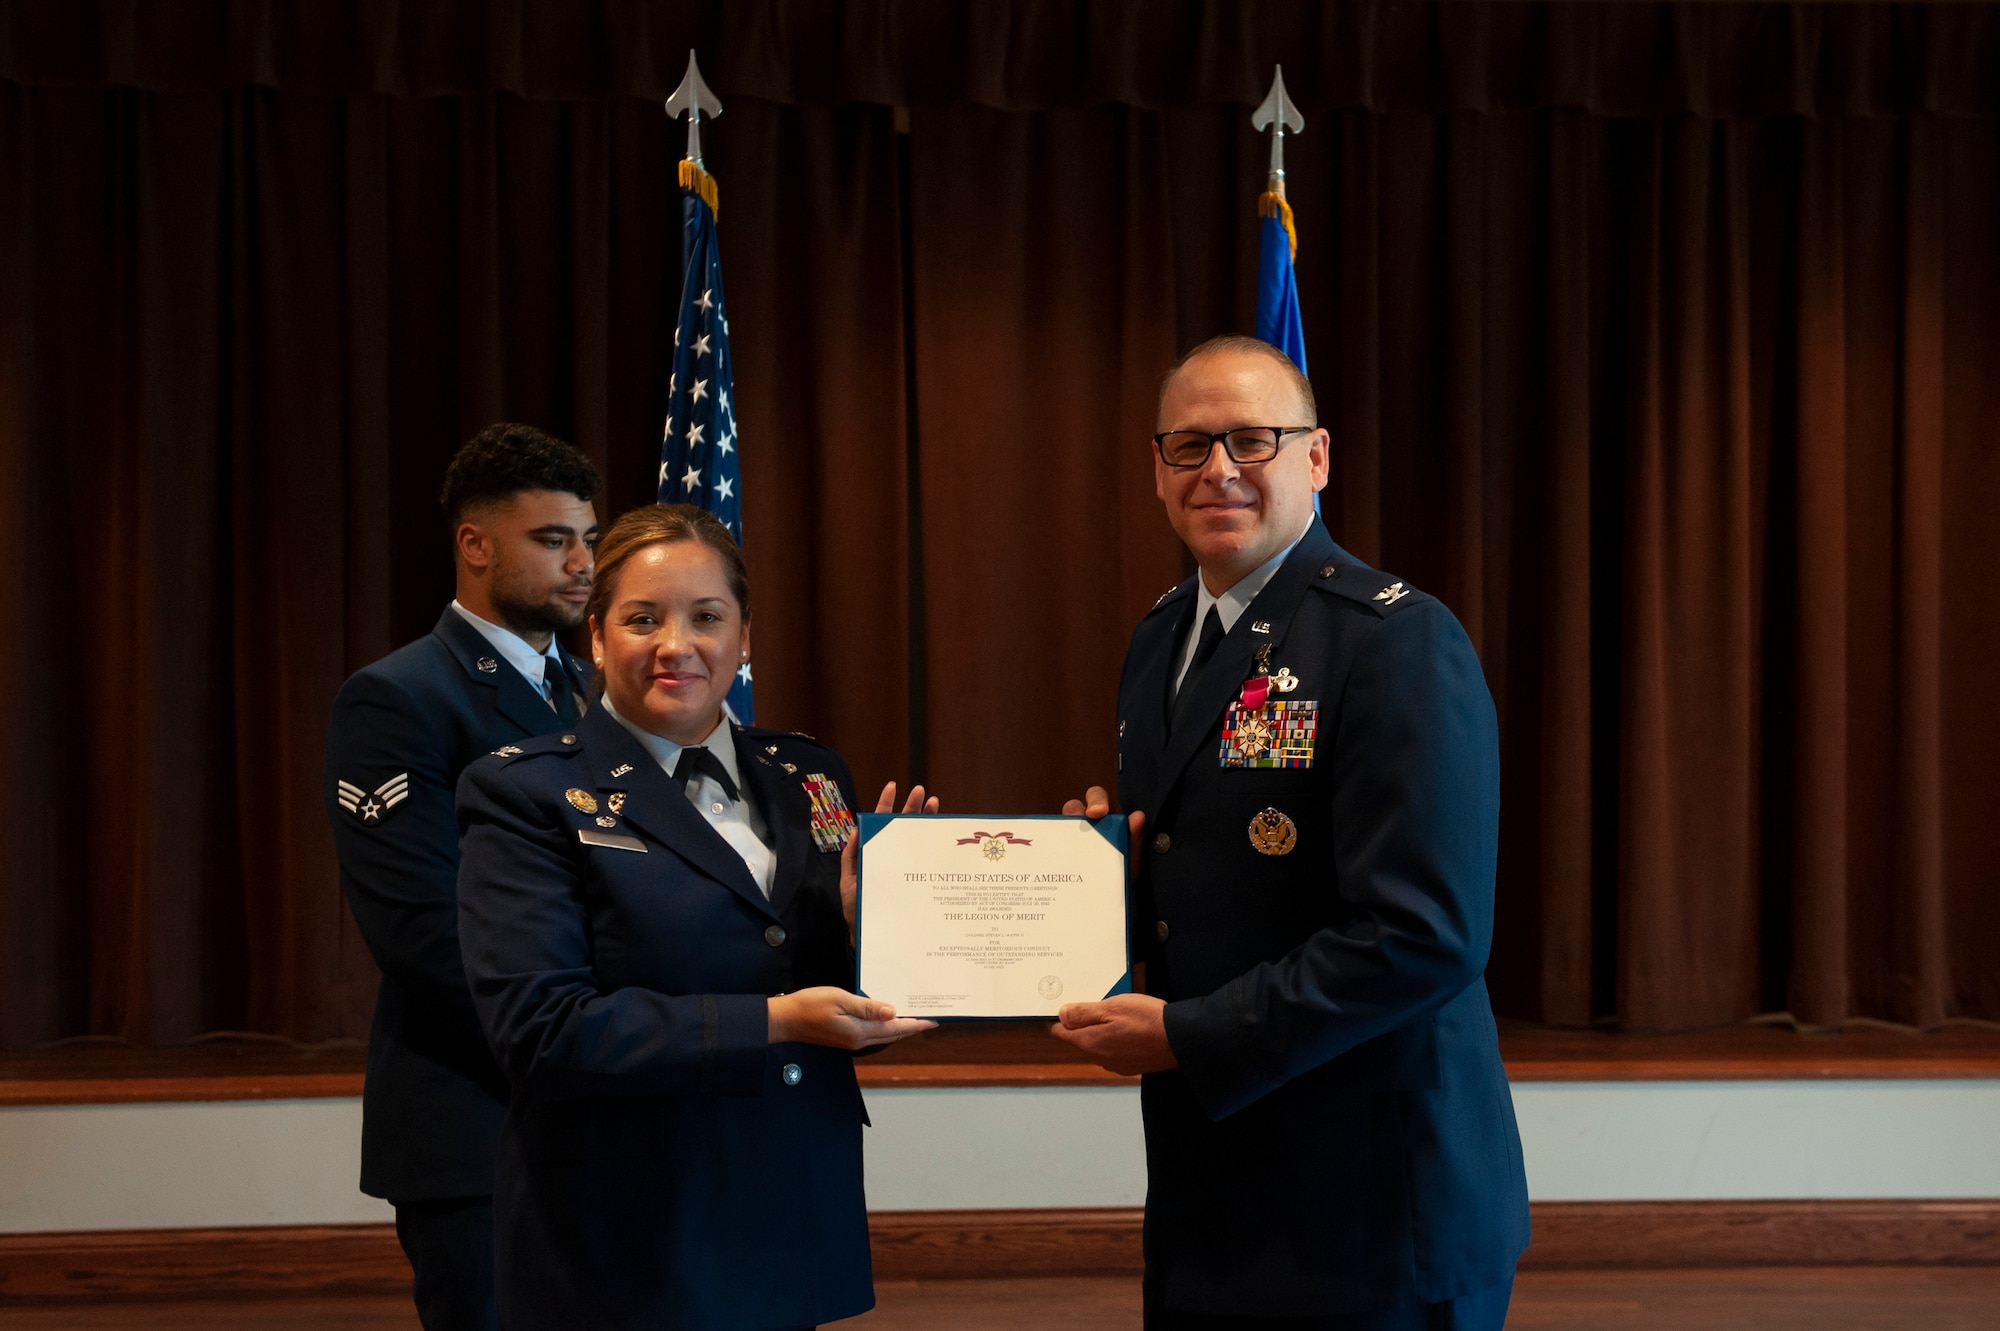 Col. Steven L. Watts II, outbound Geospatial and Signatures Intelligence Group commander, accepts the Legion of Merit award from Col. Ariel G. Batungbacal, National Air and Space Intelligence Center commander, during the group’s change of command ceremony at Wright-Patterson Air Force Base, Ohio, July 25, 2023. The Legion of Merit Medal is awarded for exceptionally meritorious conduct in the performance of outstanding services and achievements.